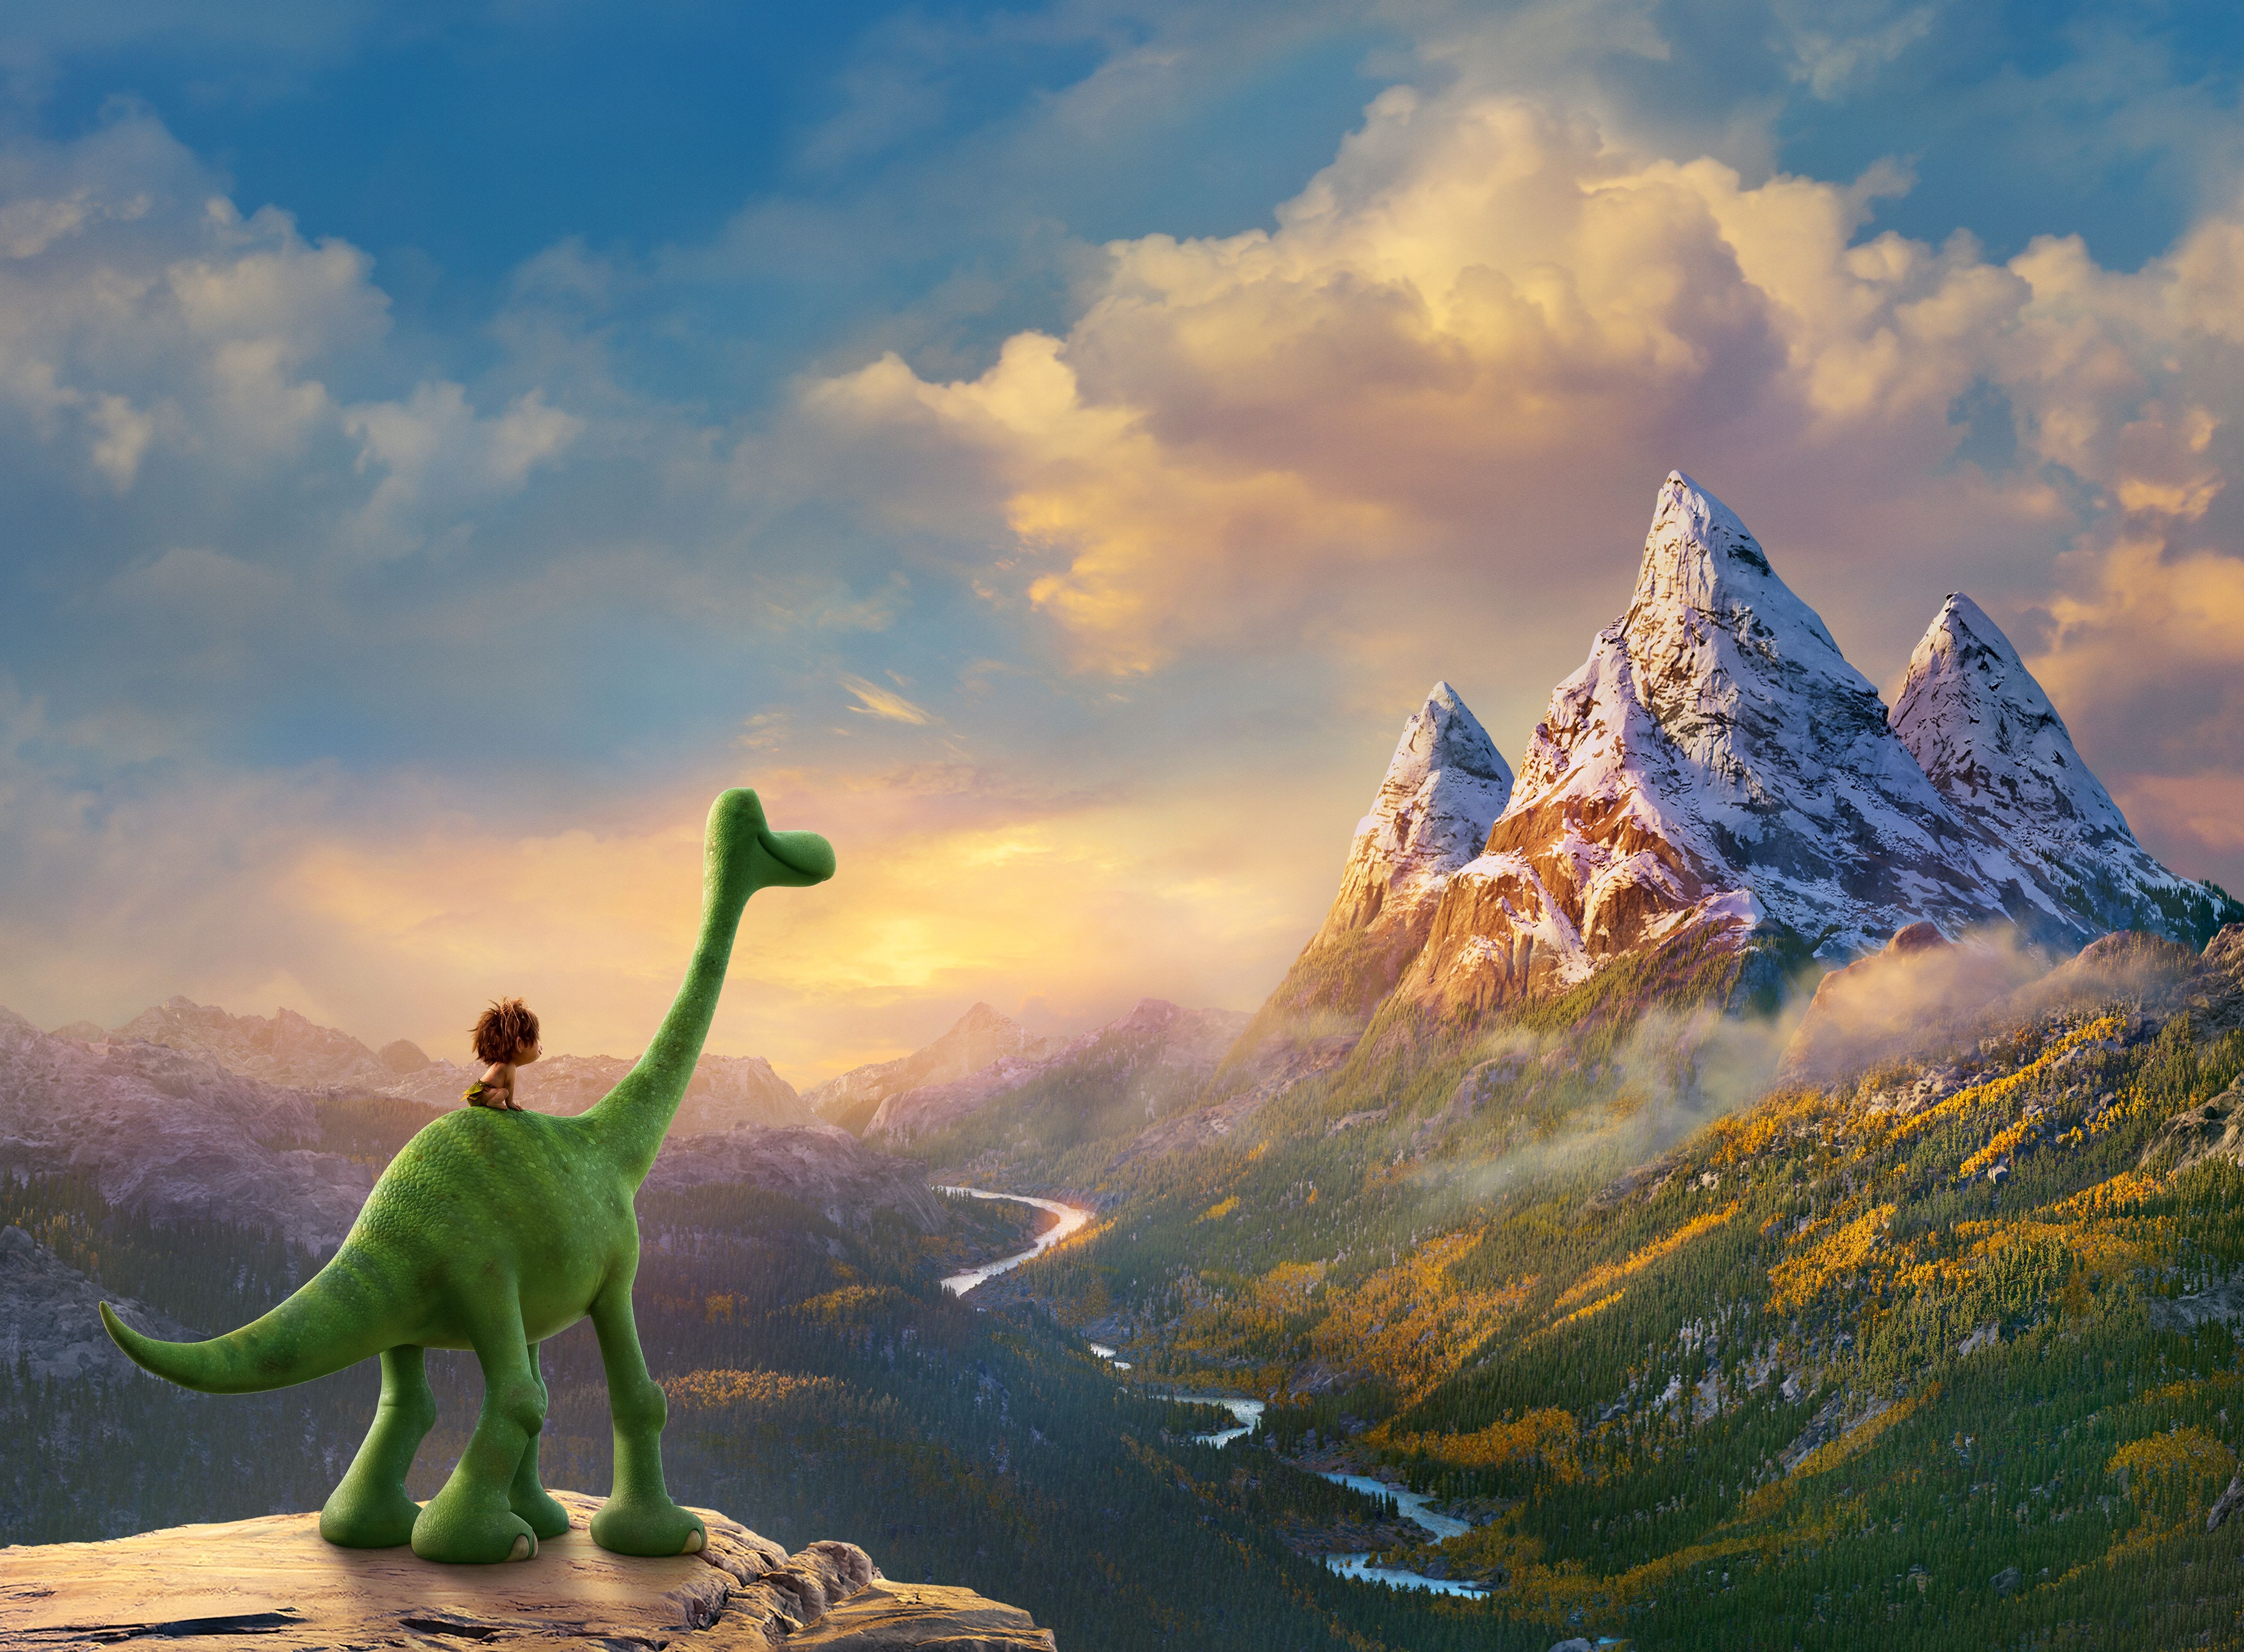 The Good Dinosaur's protagonist Arlo and deuteragonist Spot gaze out over a lush mountain range from atop a hill. 